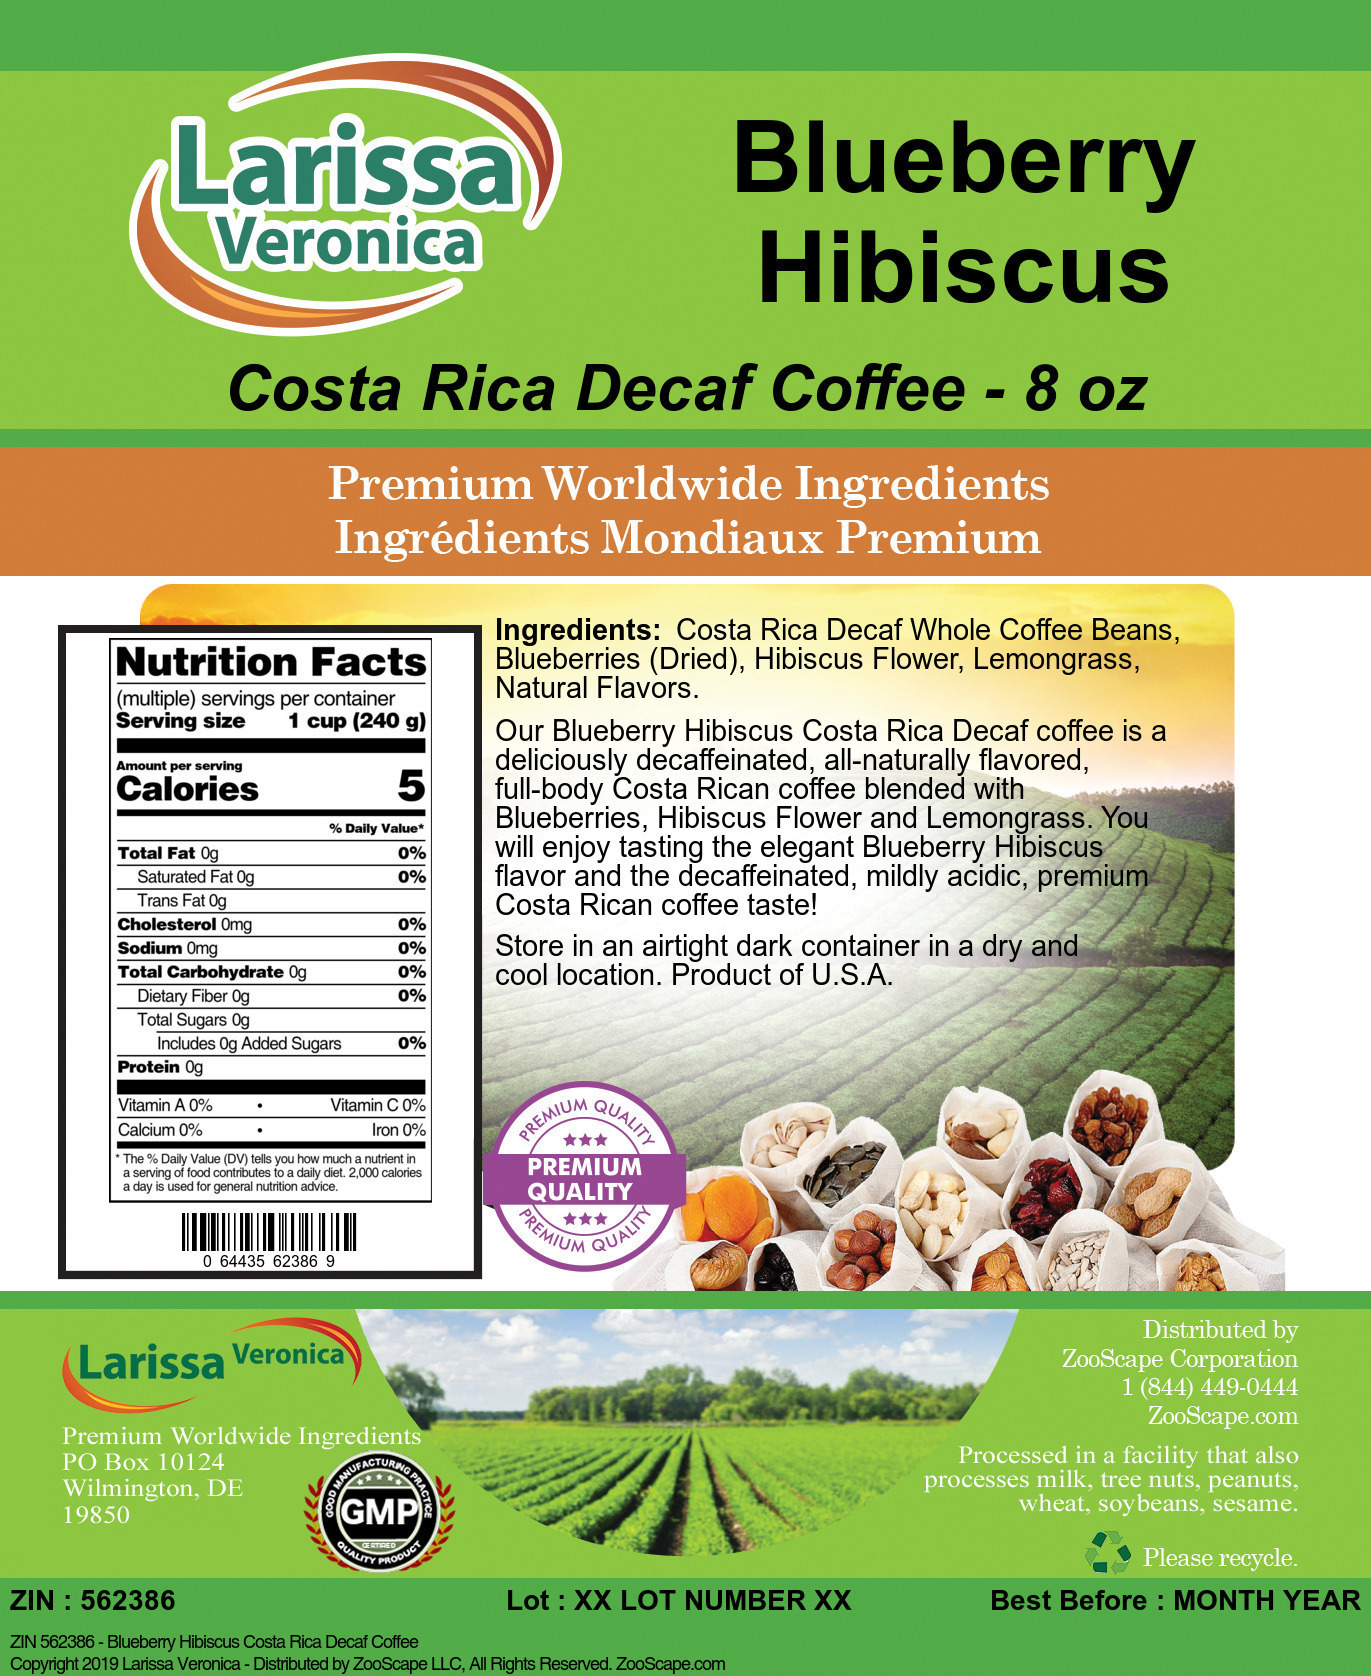 Blueberry Hibiscus Costa Rica Decaf Coffee - Label